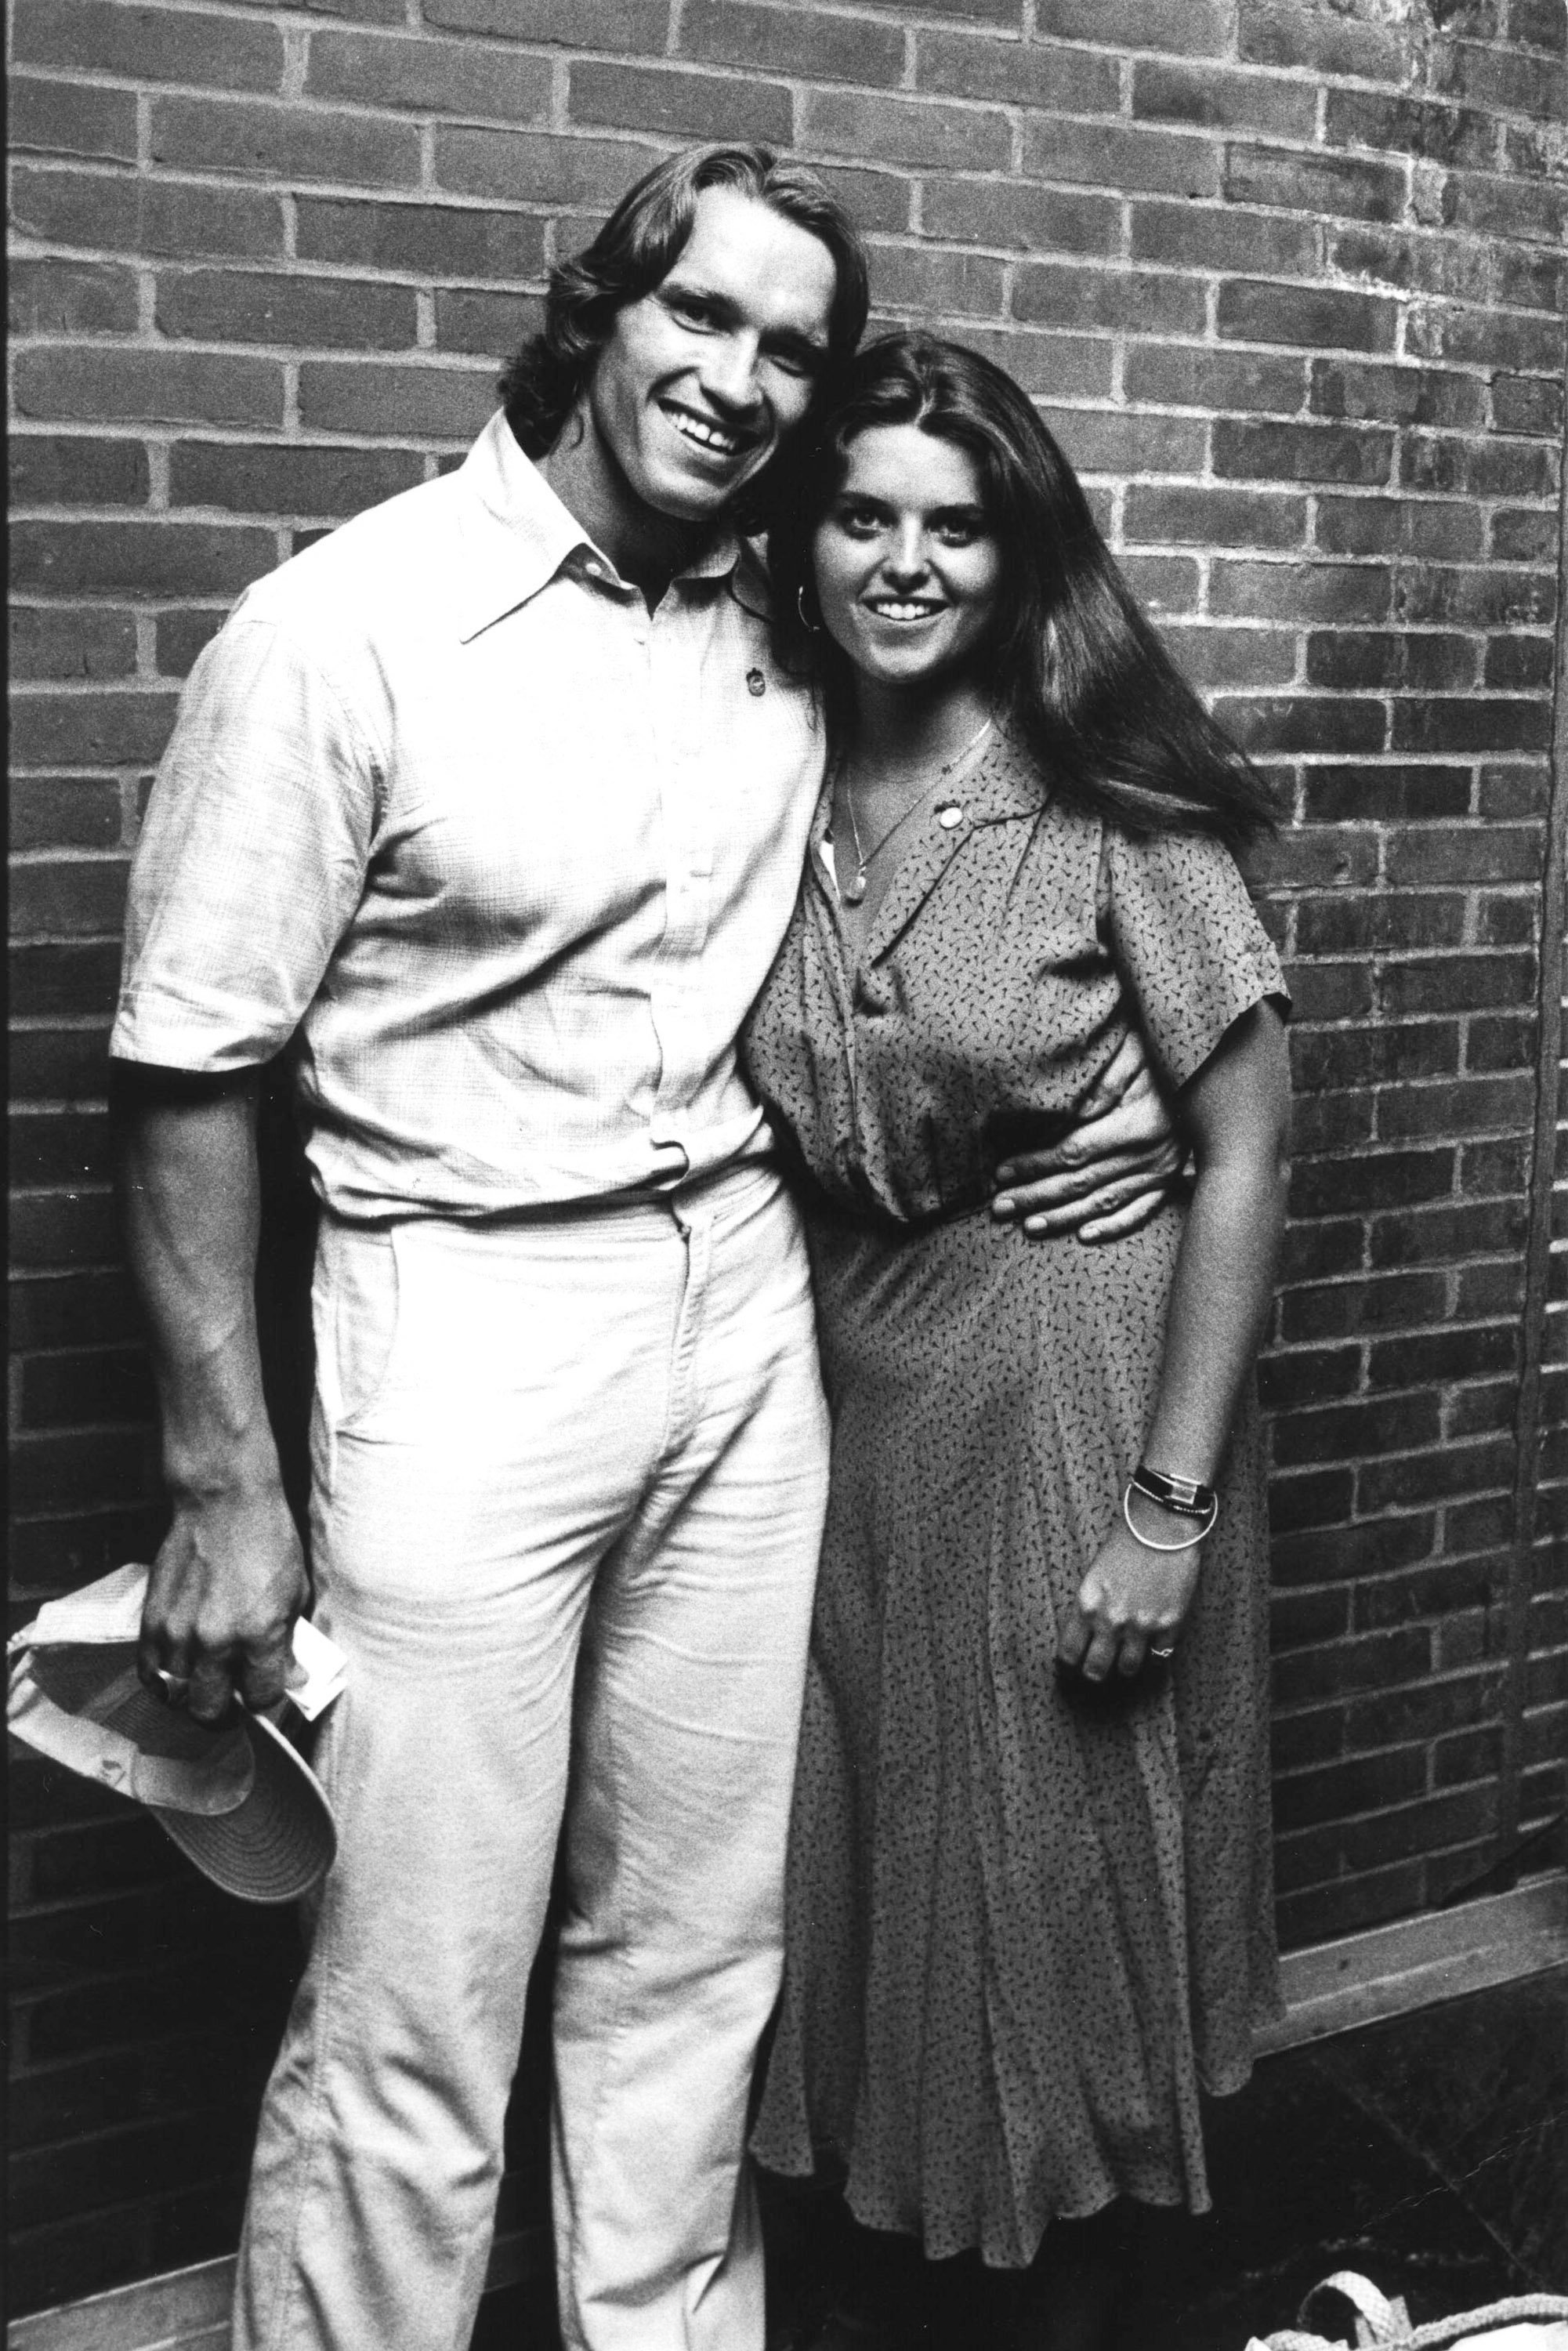 Arnold Schwarzenegger and Maria Shriver were pictured looking happy together. | Source: Getty Images